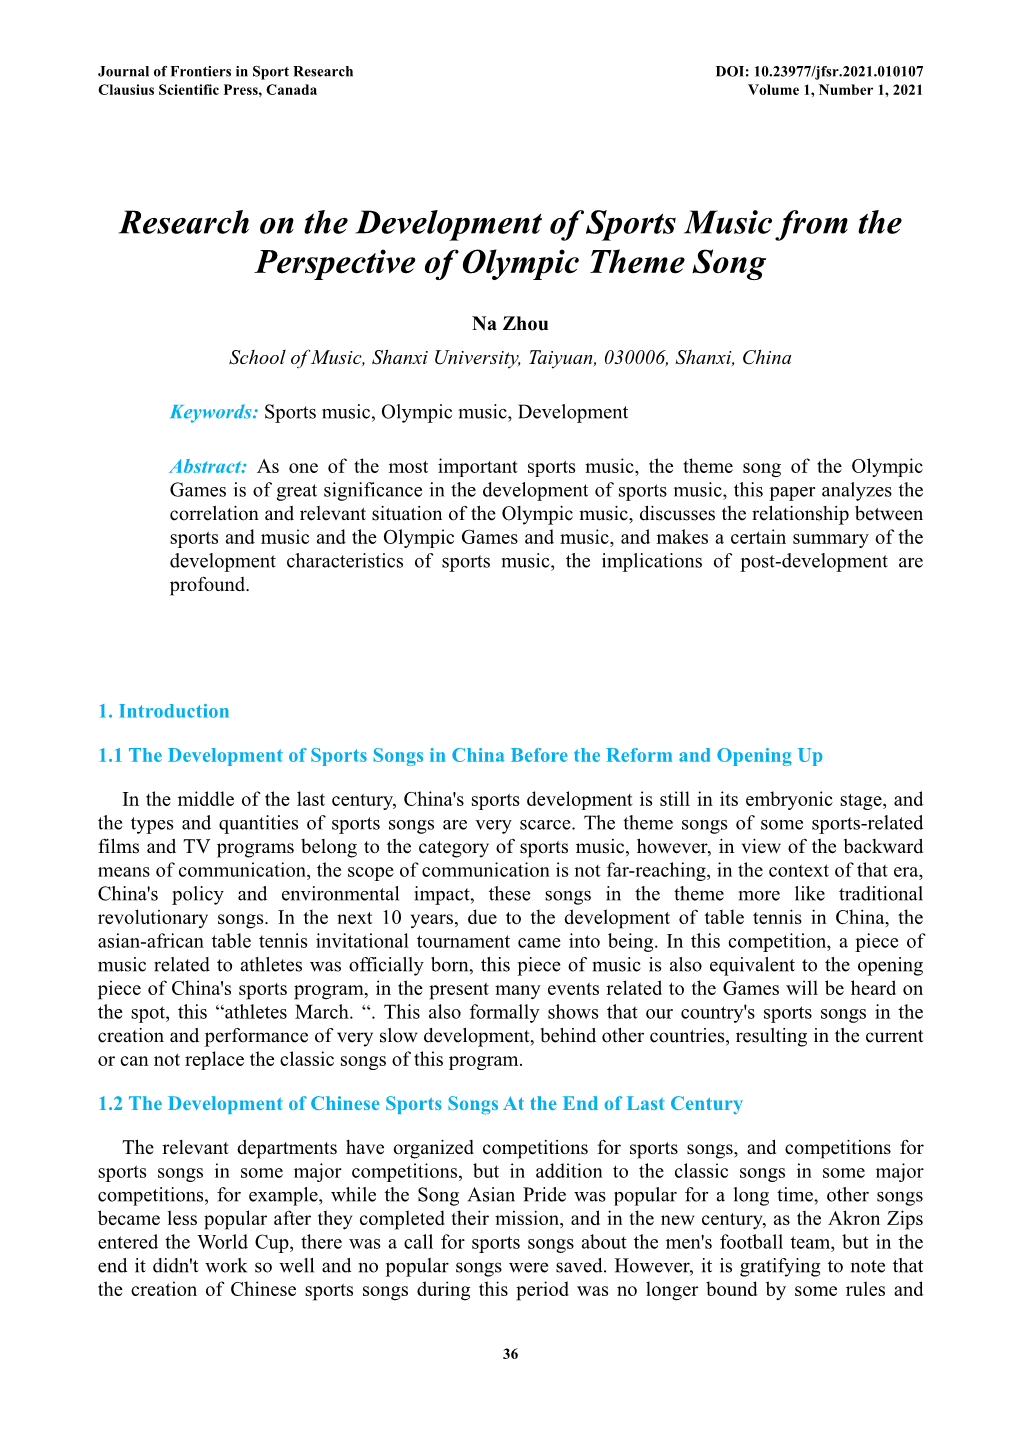 Research on the Development of Sports Music from the Perspective of Olympic Theme Song